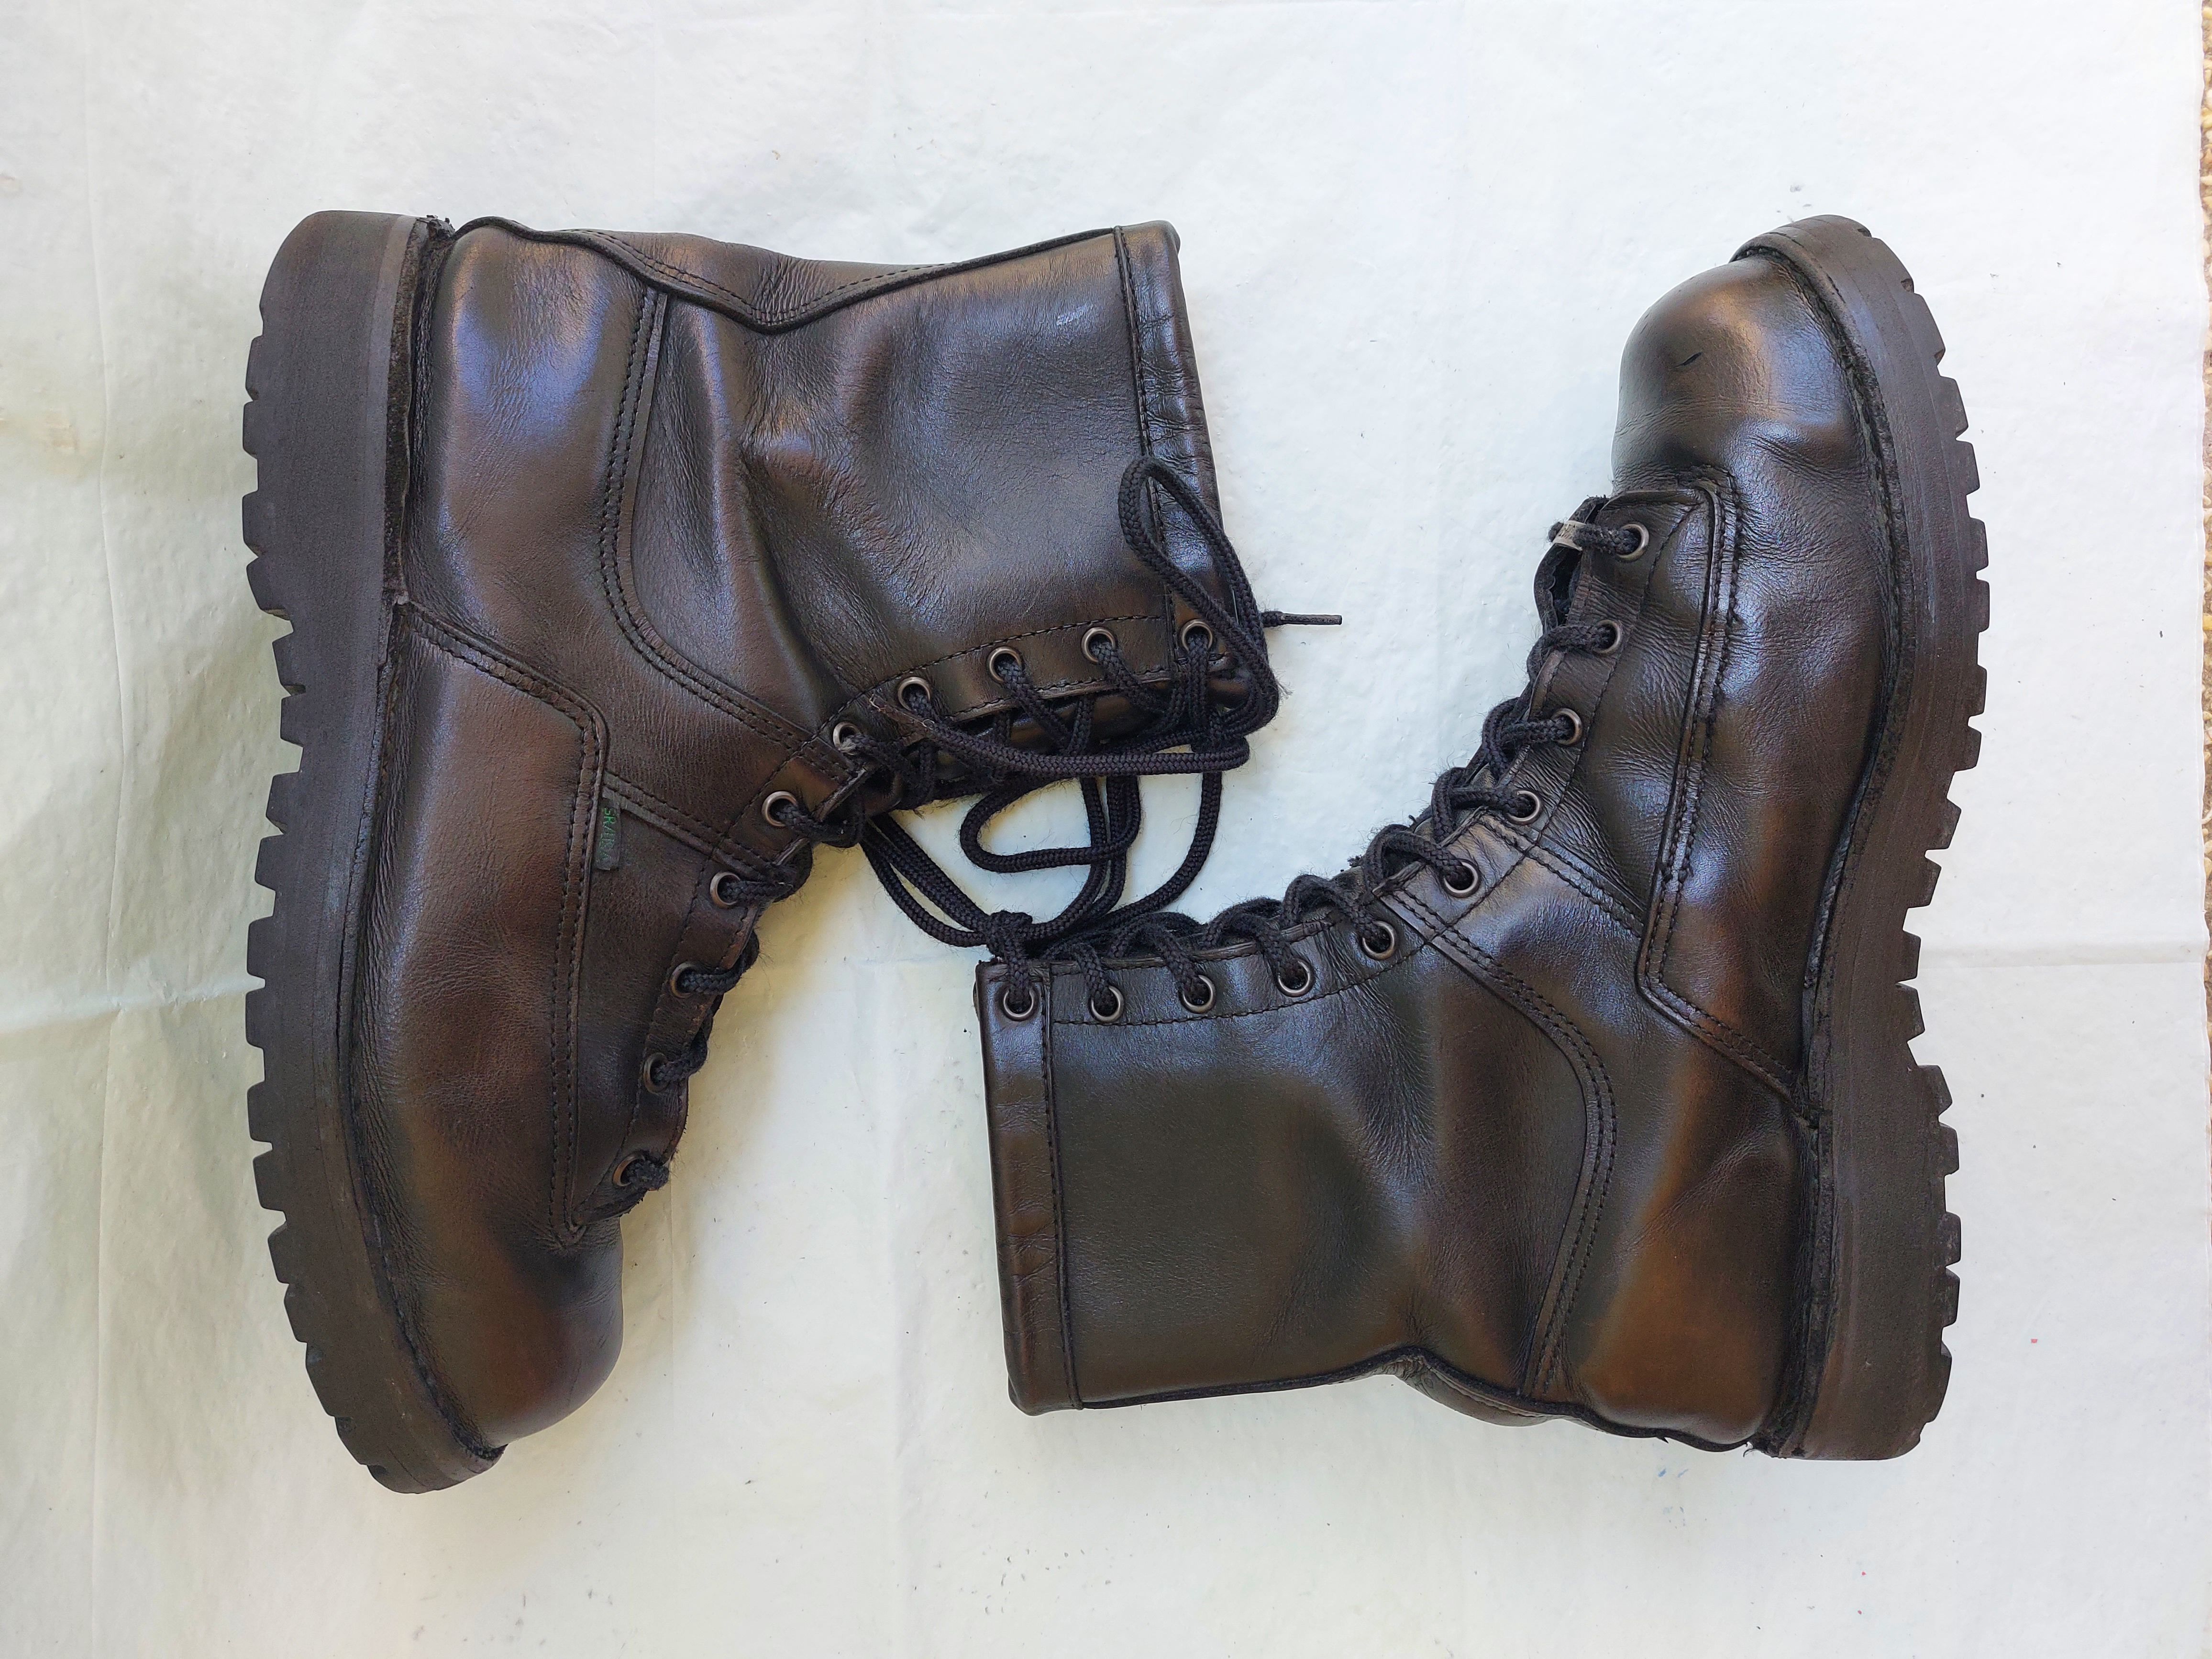 Danner DANNER RECON 8" black insulated 200G GORE-TEX combat boots Size US 10 / EU 43 - 1 Preview